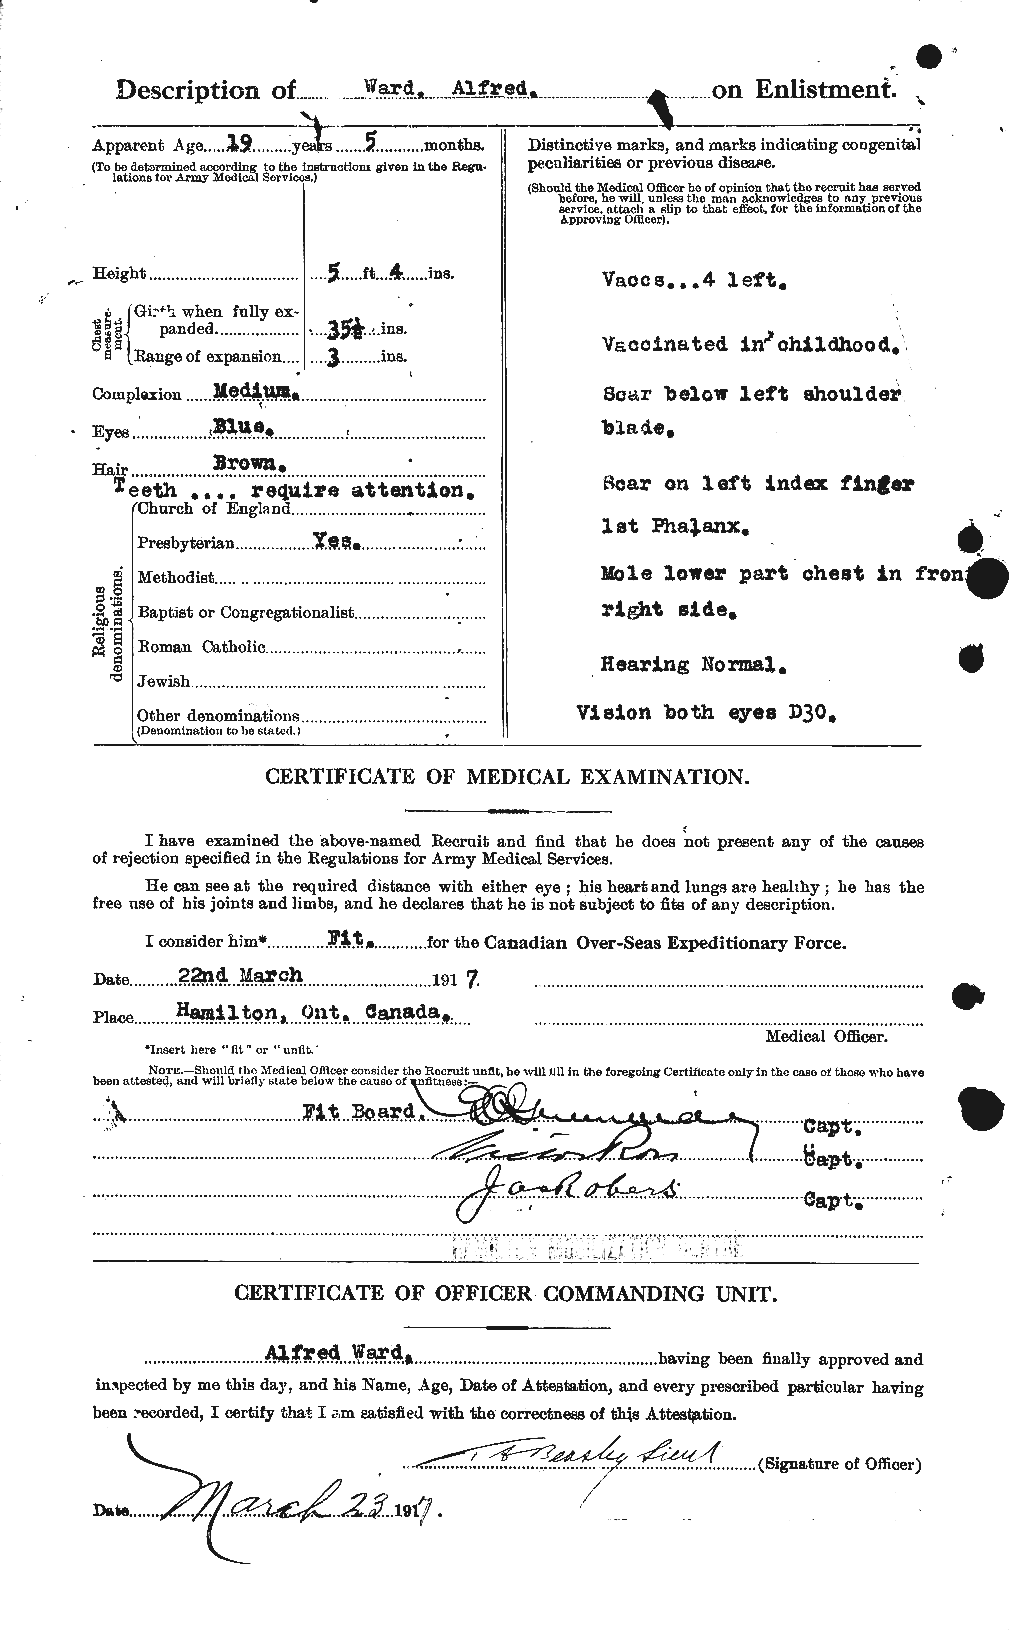 Personnel Records of the First World War - CEF 655114b